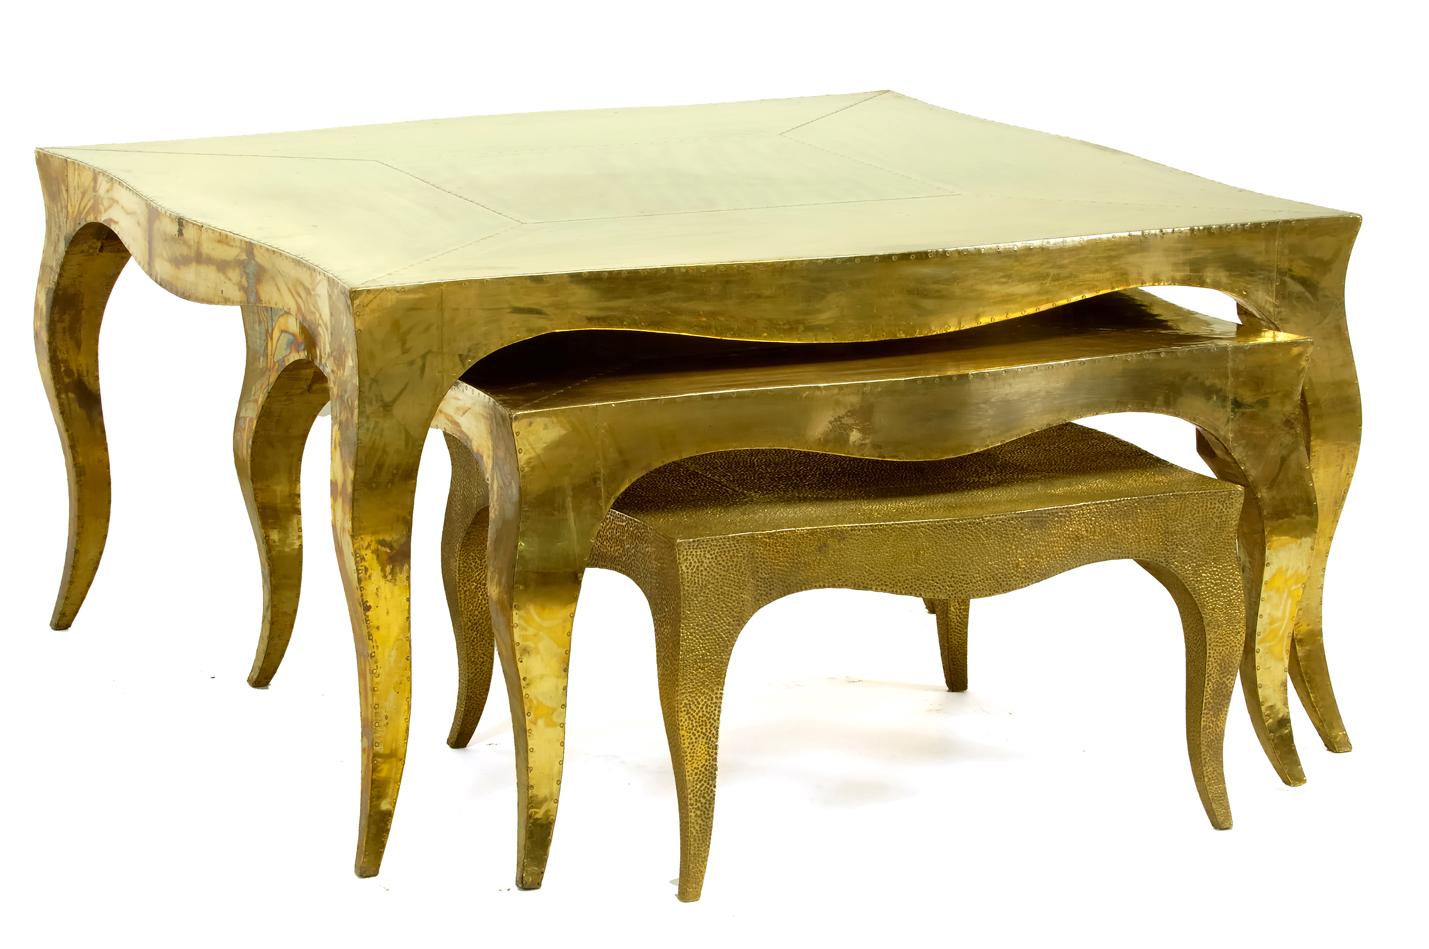 Louise Art Deco Industrial and Work Tables Mid. Hammered Brass by Paul Mathieu For Sale 5